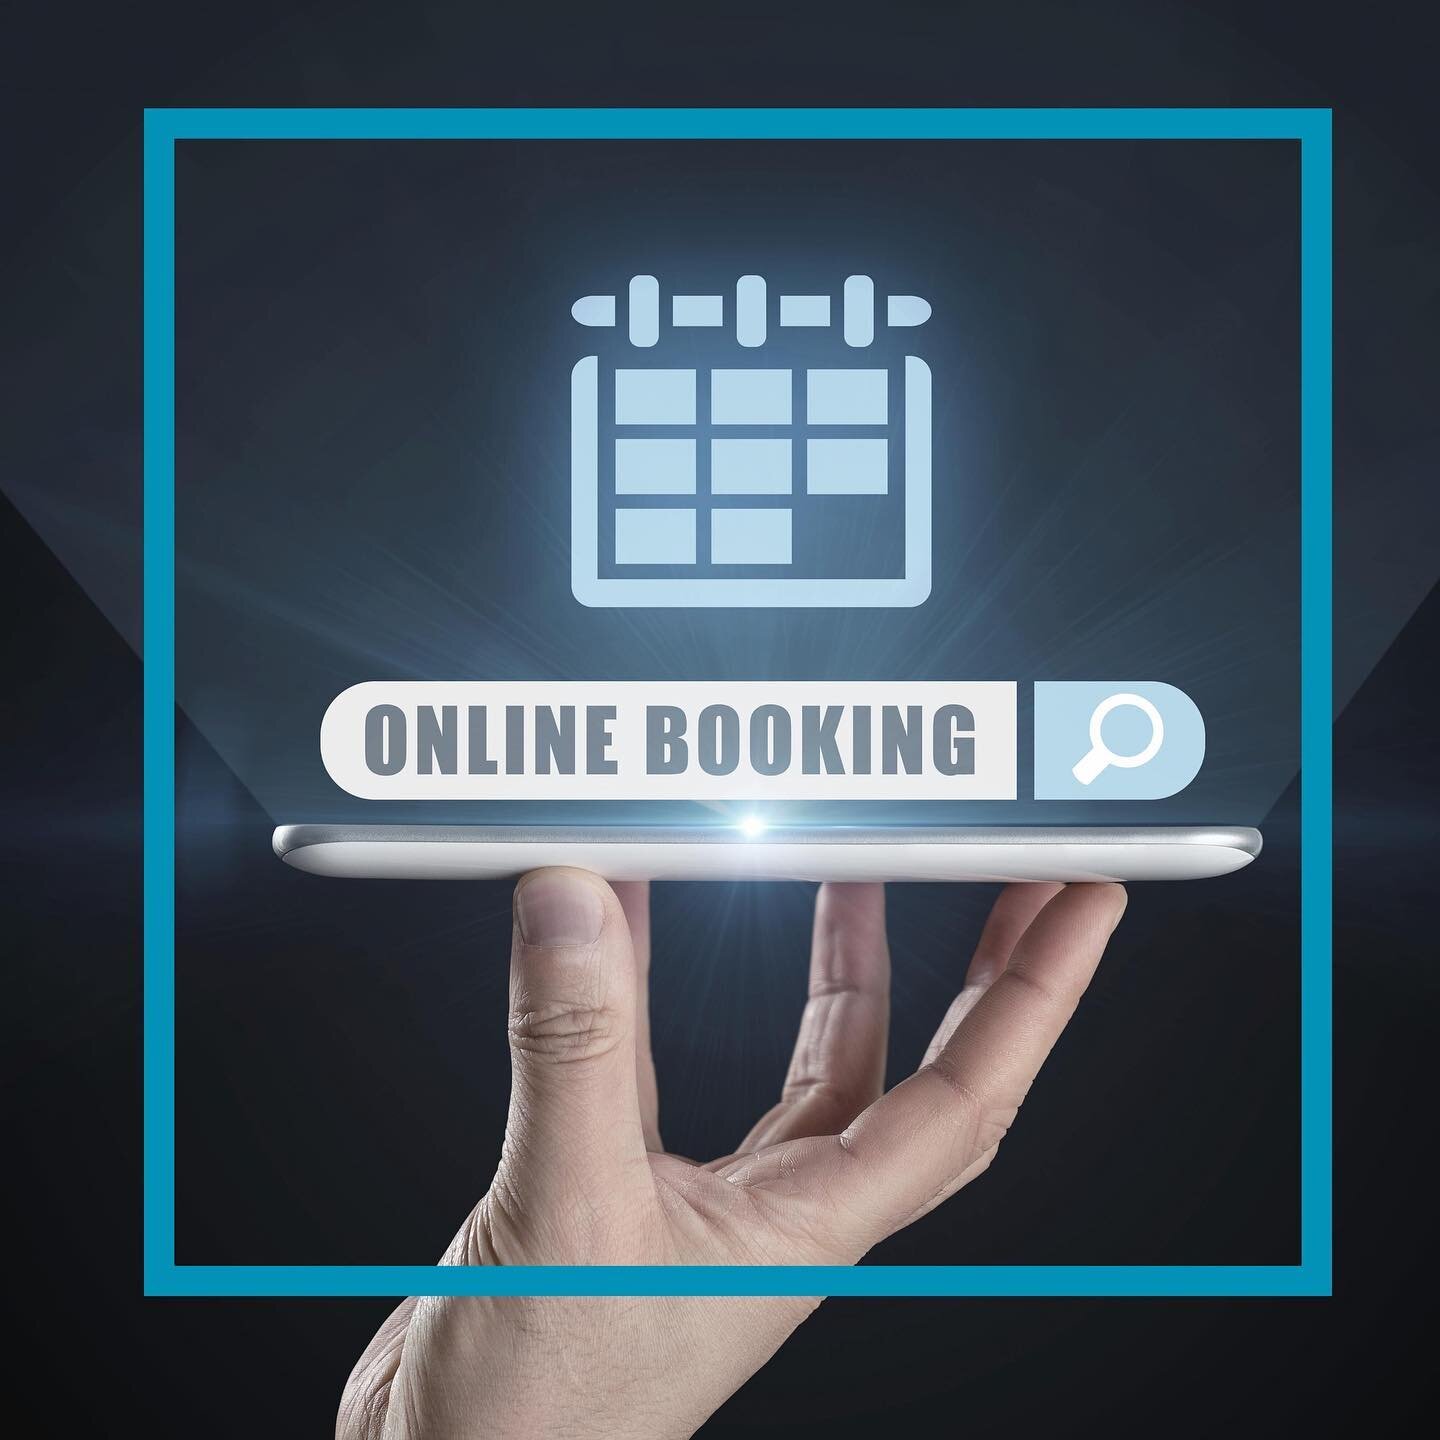 Book your appointments @backtohealthhfd quickly and easily with our NEW online booking system 🎉
.
.
.

#backtohealth #hertford #ware #hertfordshire #gym #injury #sportsinjury #sportsscience #sportsmassage #achesandpains #osteopathy #workout #gym #ba